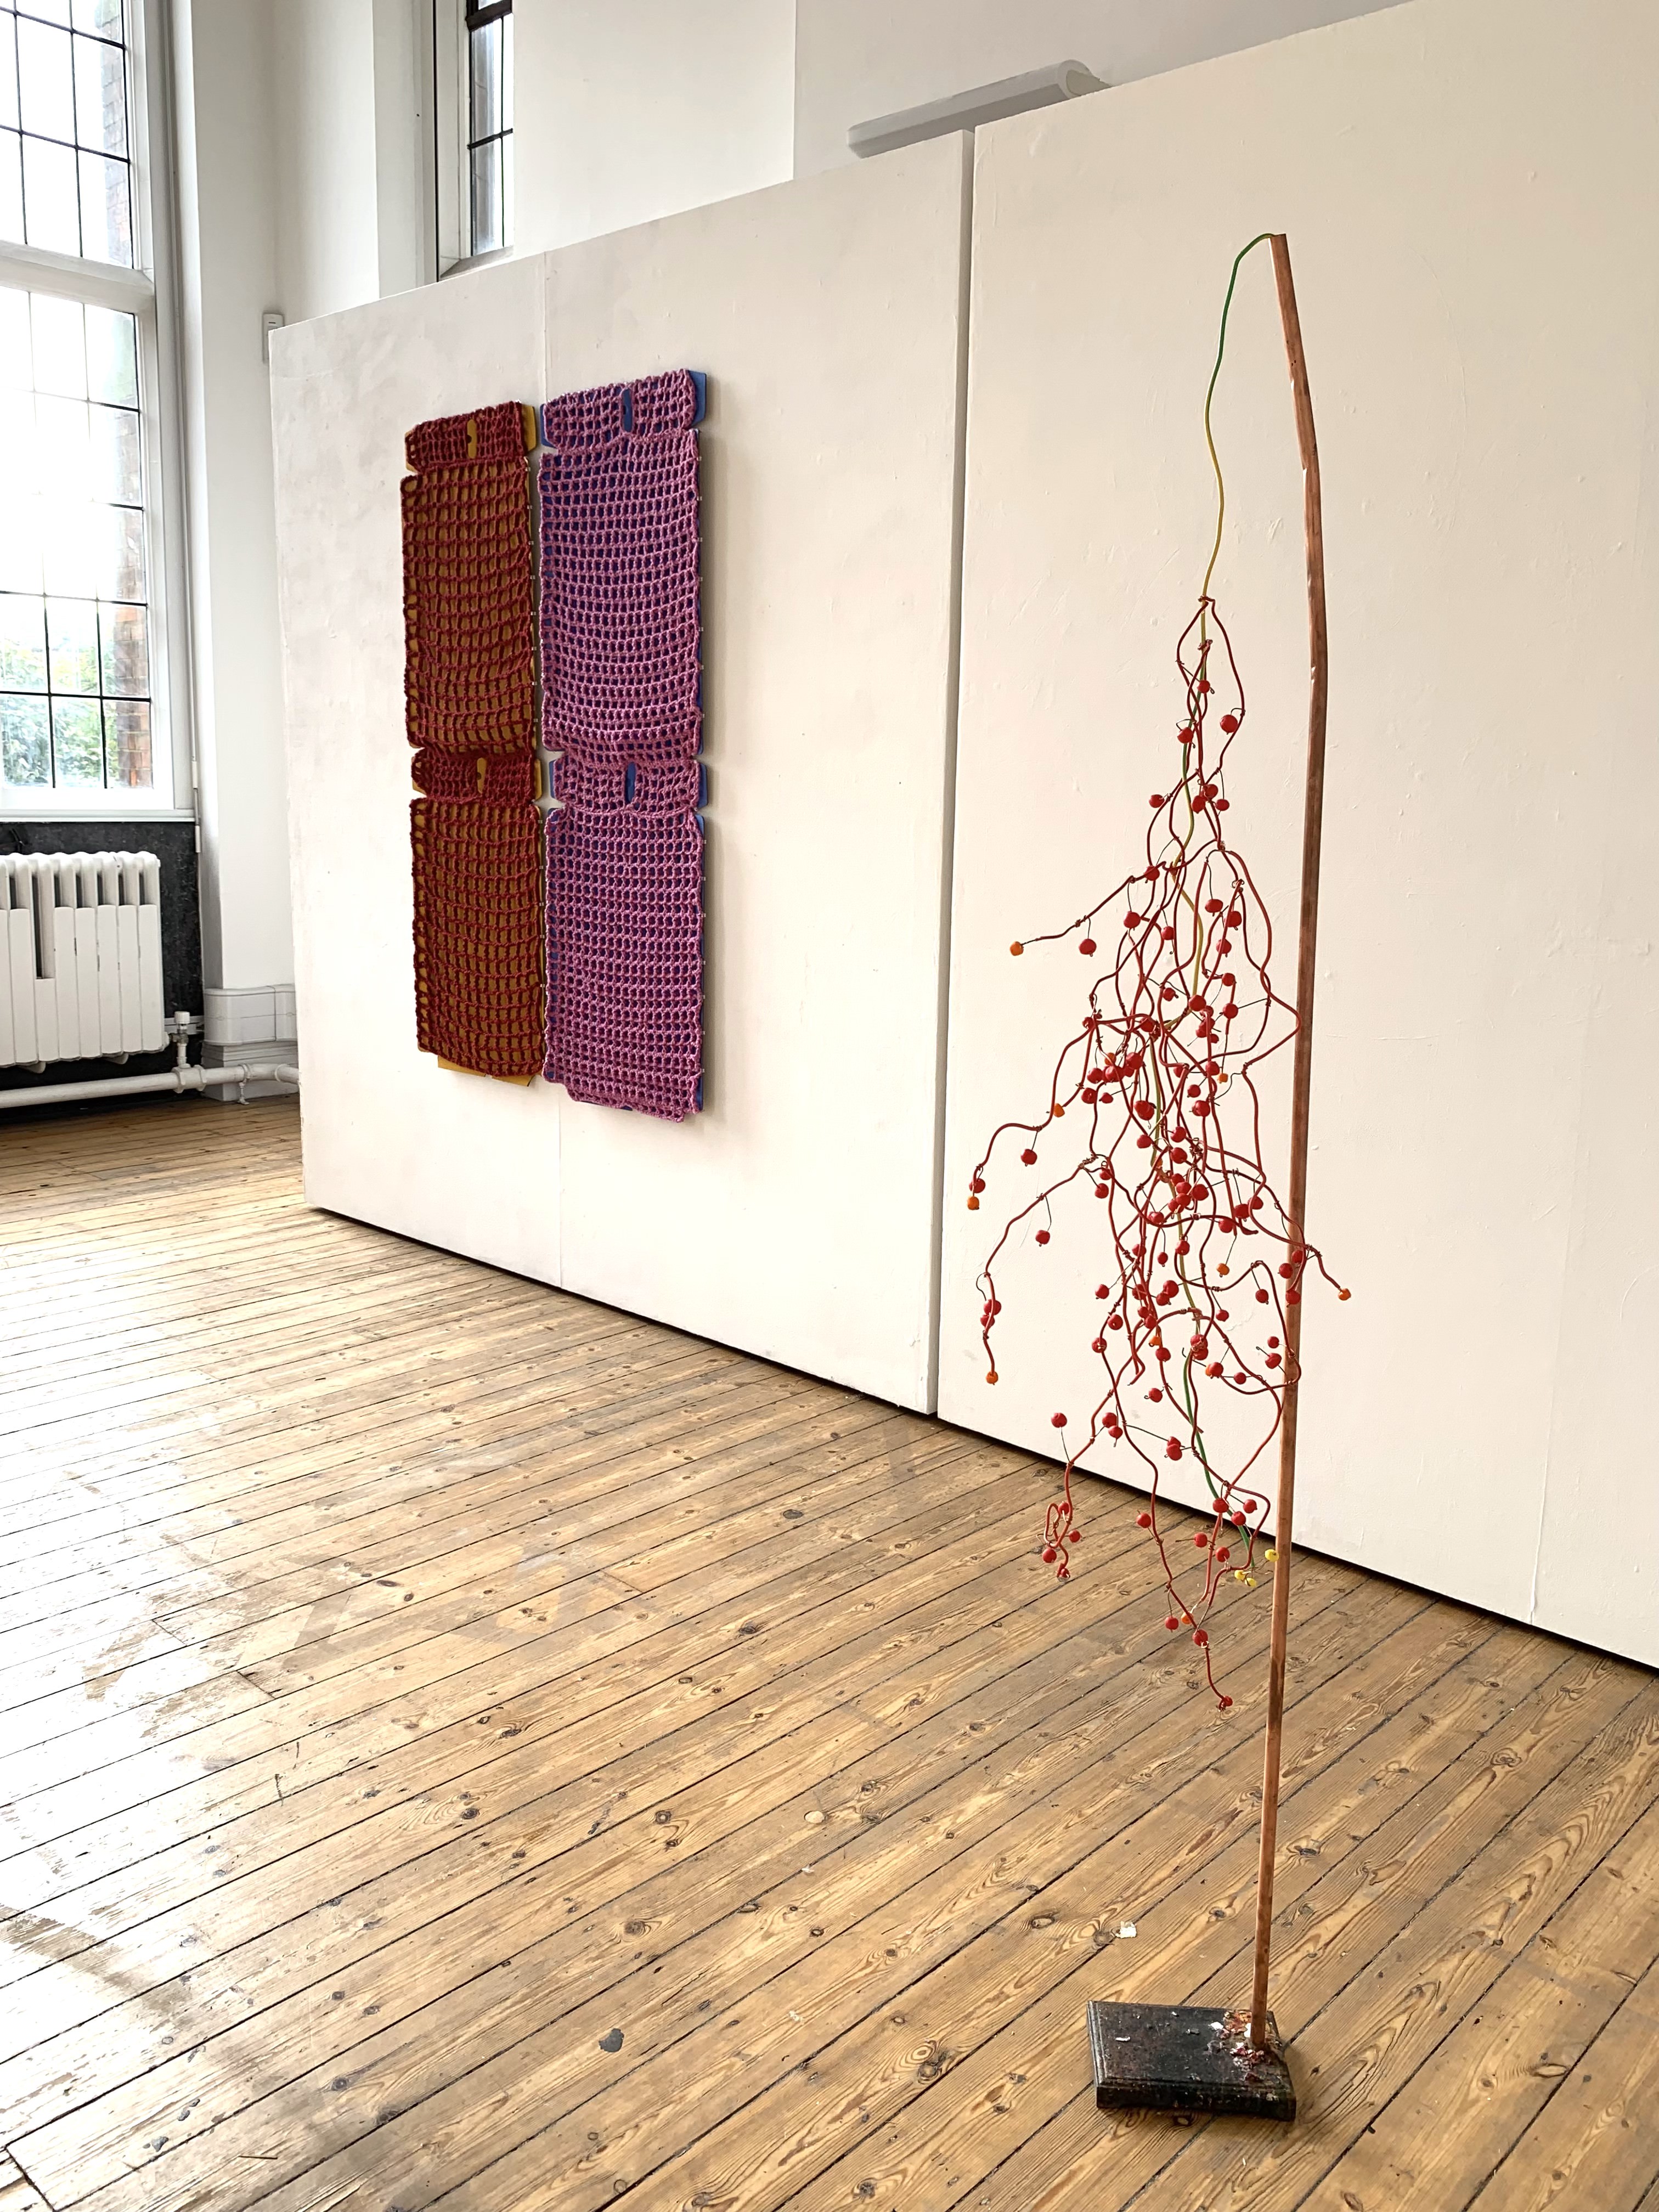 image1 (in betweens E Boukla and D. Gardner i)i.  left Eirini Boukla, title Catch 10, 2023. Materials: Found cardboard box, gouache, wool yarn.
right, Deborah Gardner, title Conduction, 2023.  Materials: repurposed copper pipe and wire, electrical waste cable and clay beads